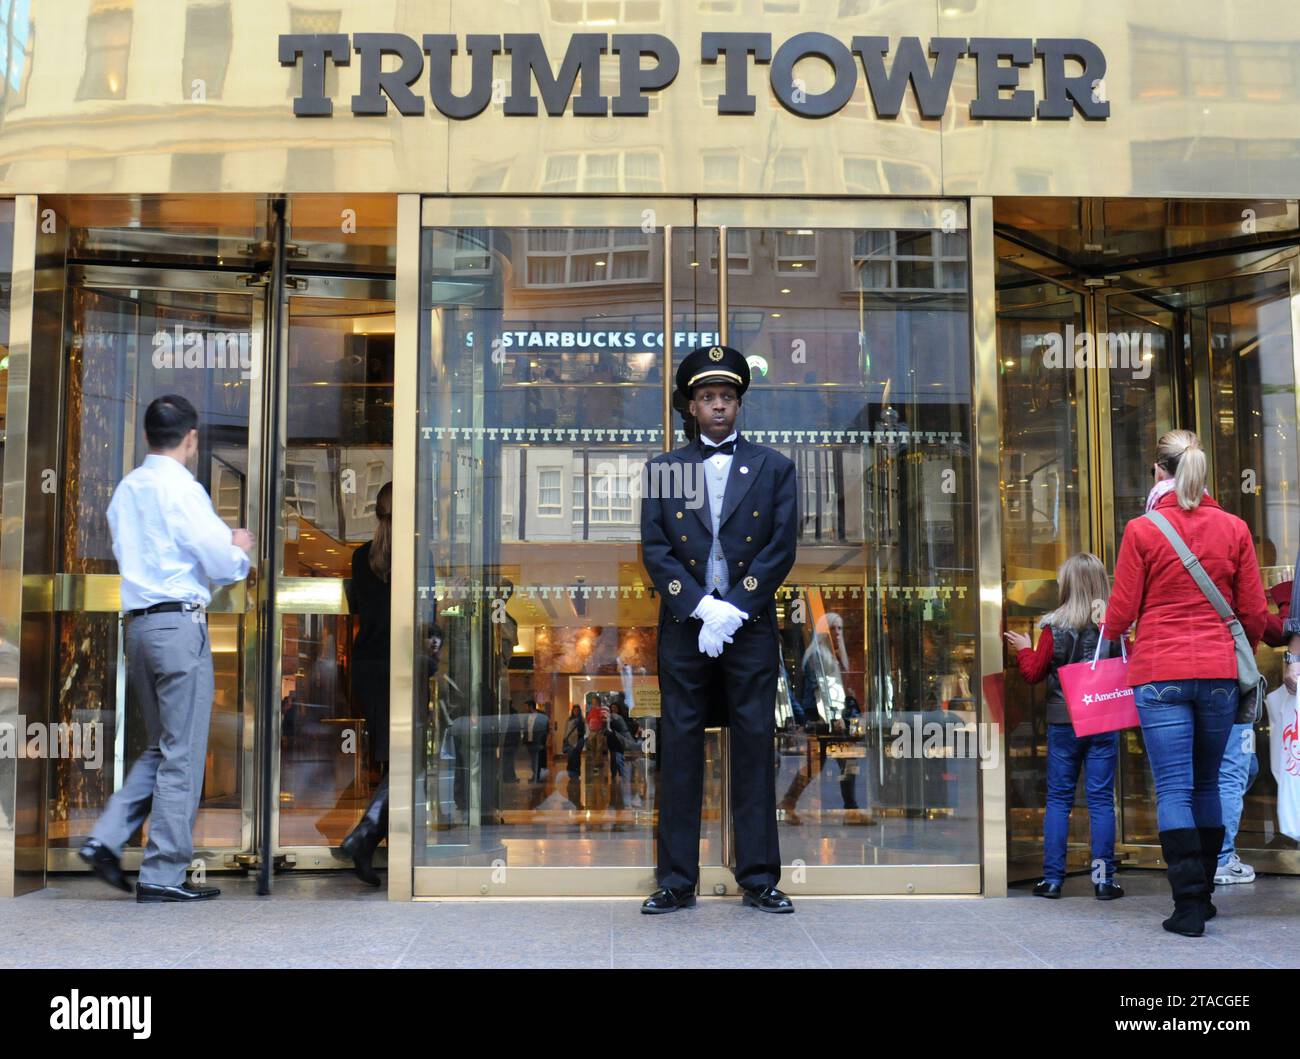 NEW YORK, NEW YORK - NOV 10, 2011: Entrance to Trump Tower on 56th street and 5th avenue in Manhattan. Stock Photo